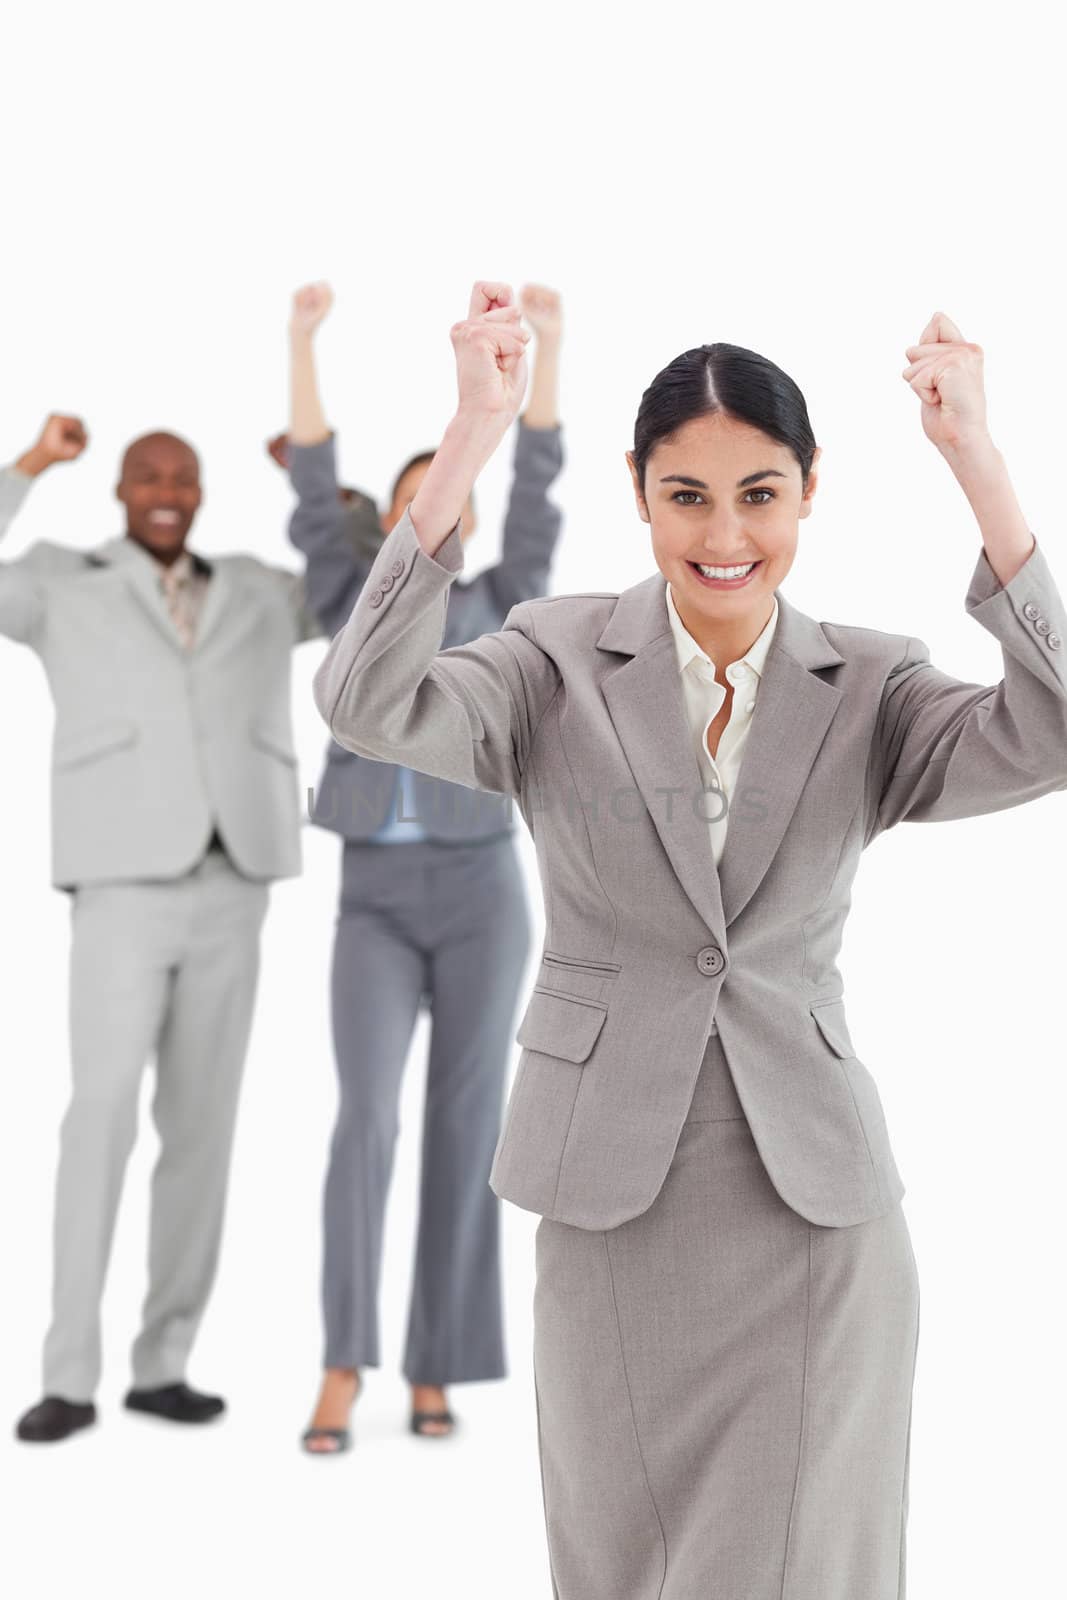 Triumphant saleswoman with cheering associates behind her against a white background